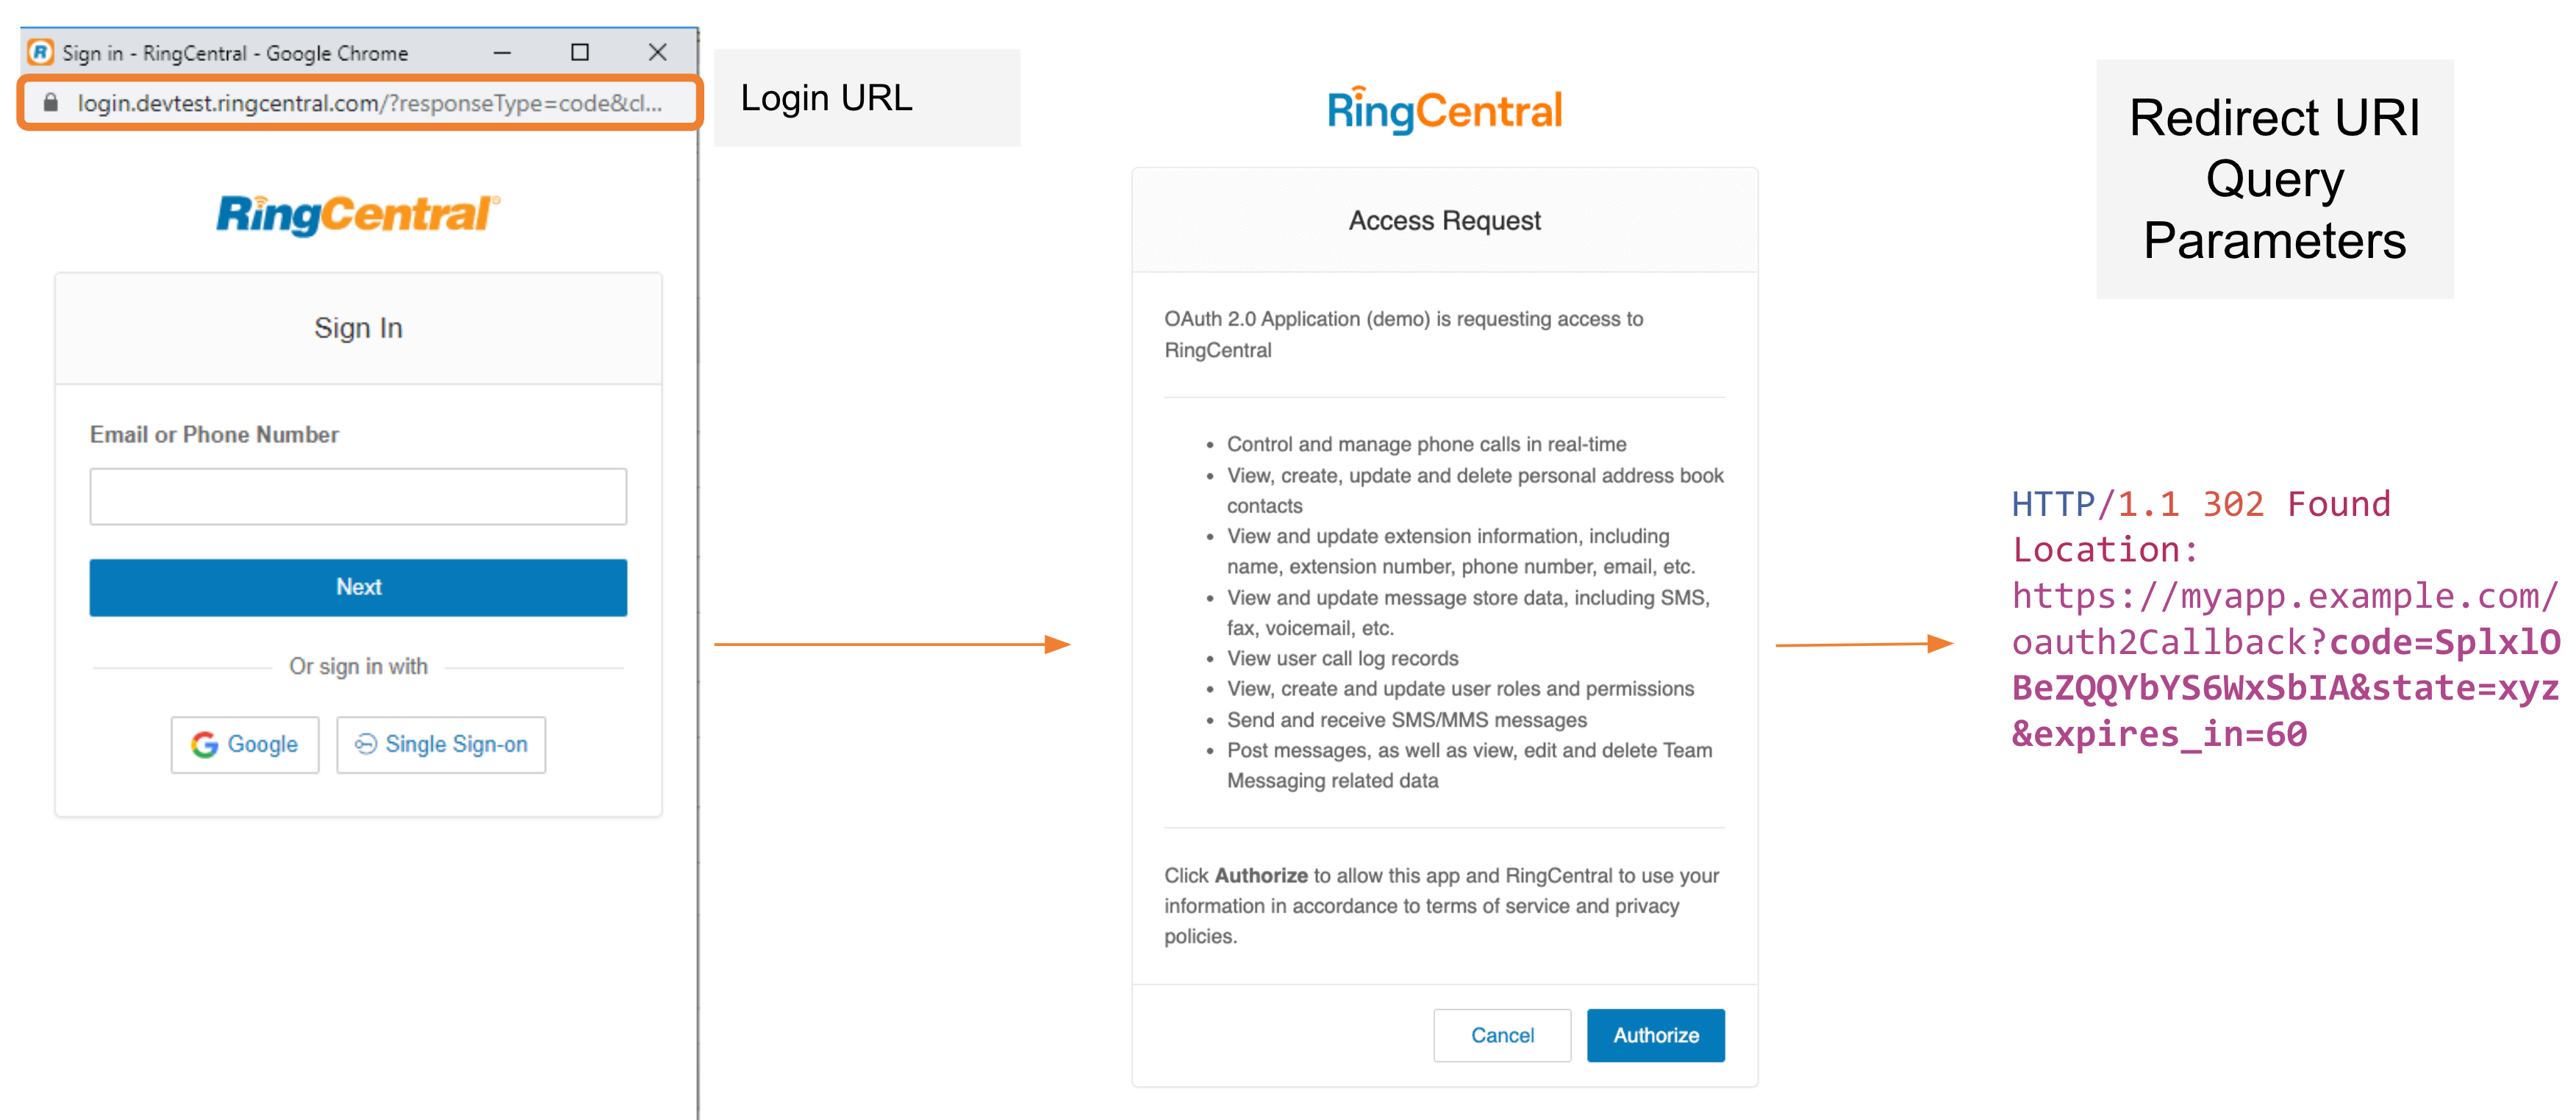 RingCentral Overview - Cloze Help Center